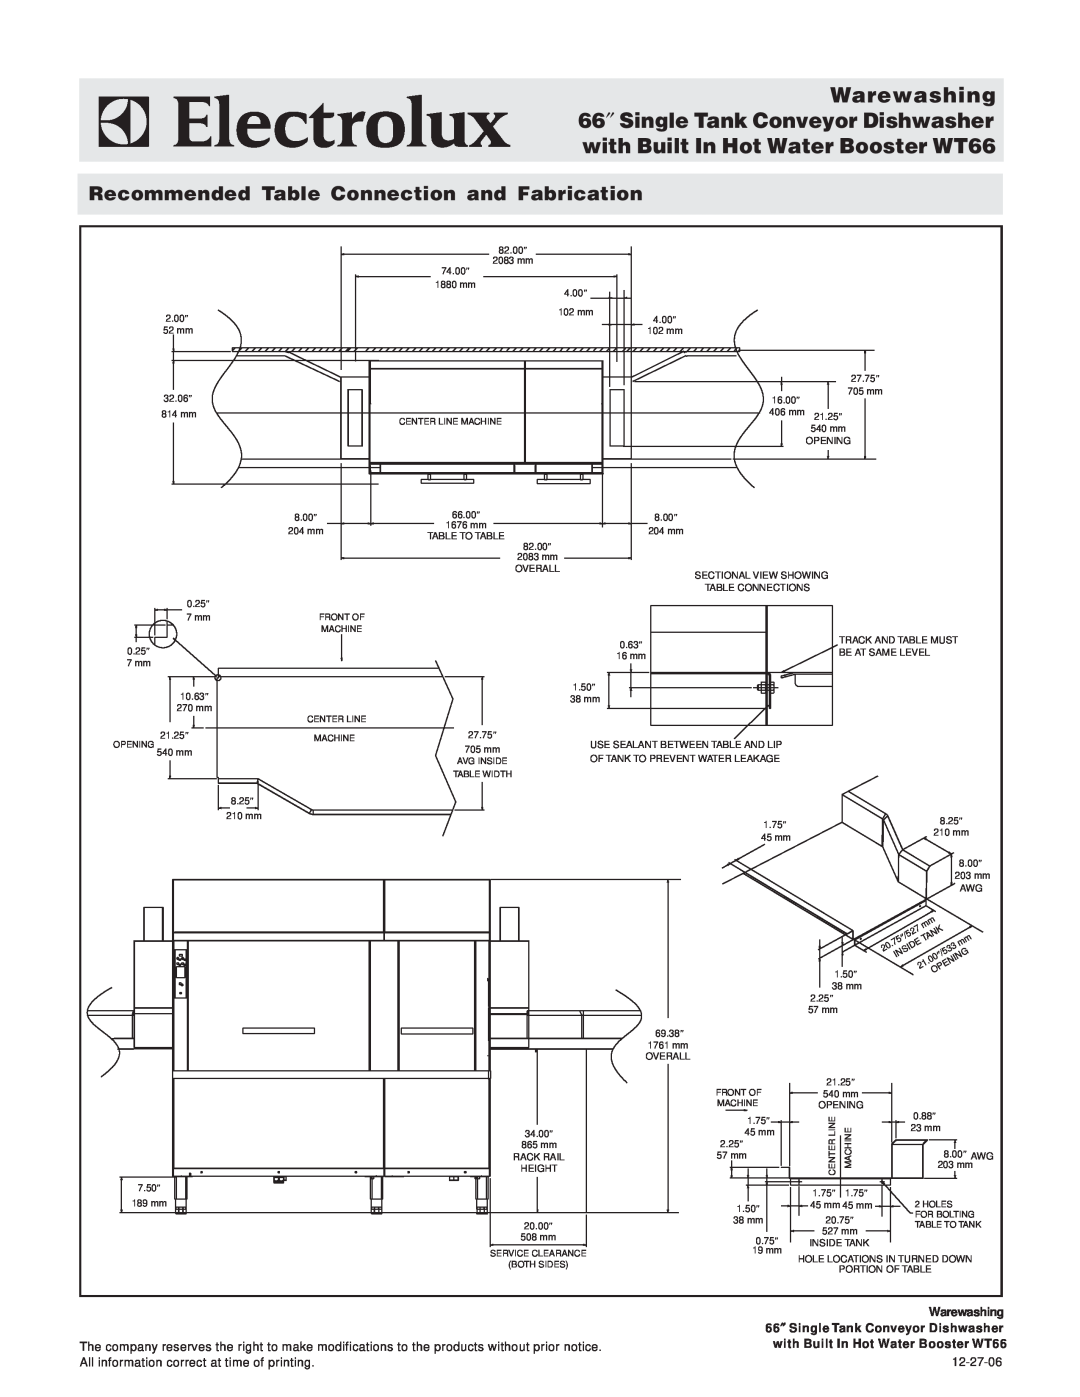 Electrolux 534092, WT66BL208 Recommended Table Connection and Fabrication, Warewashing 66″ Single Tank Conveyor Dishwasher 